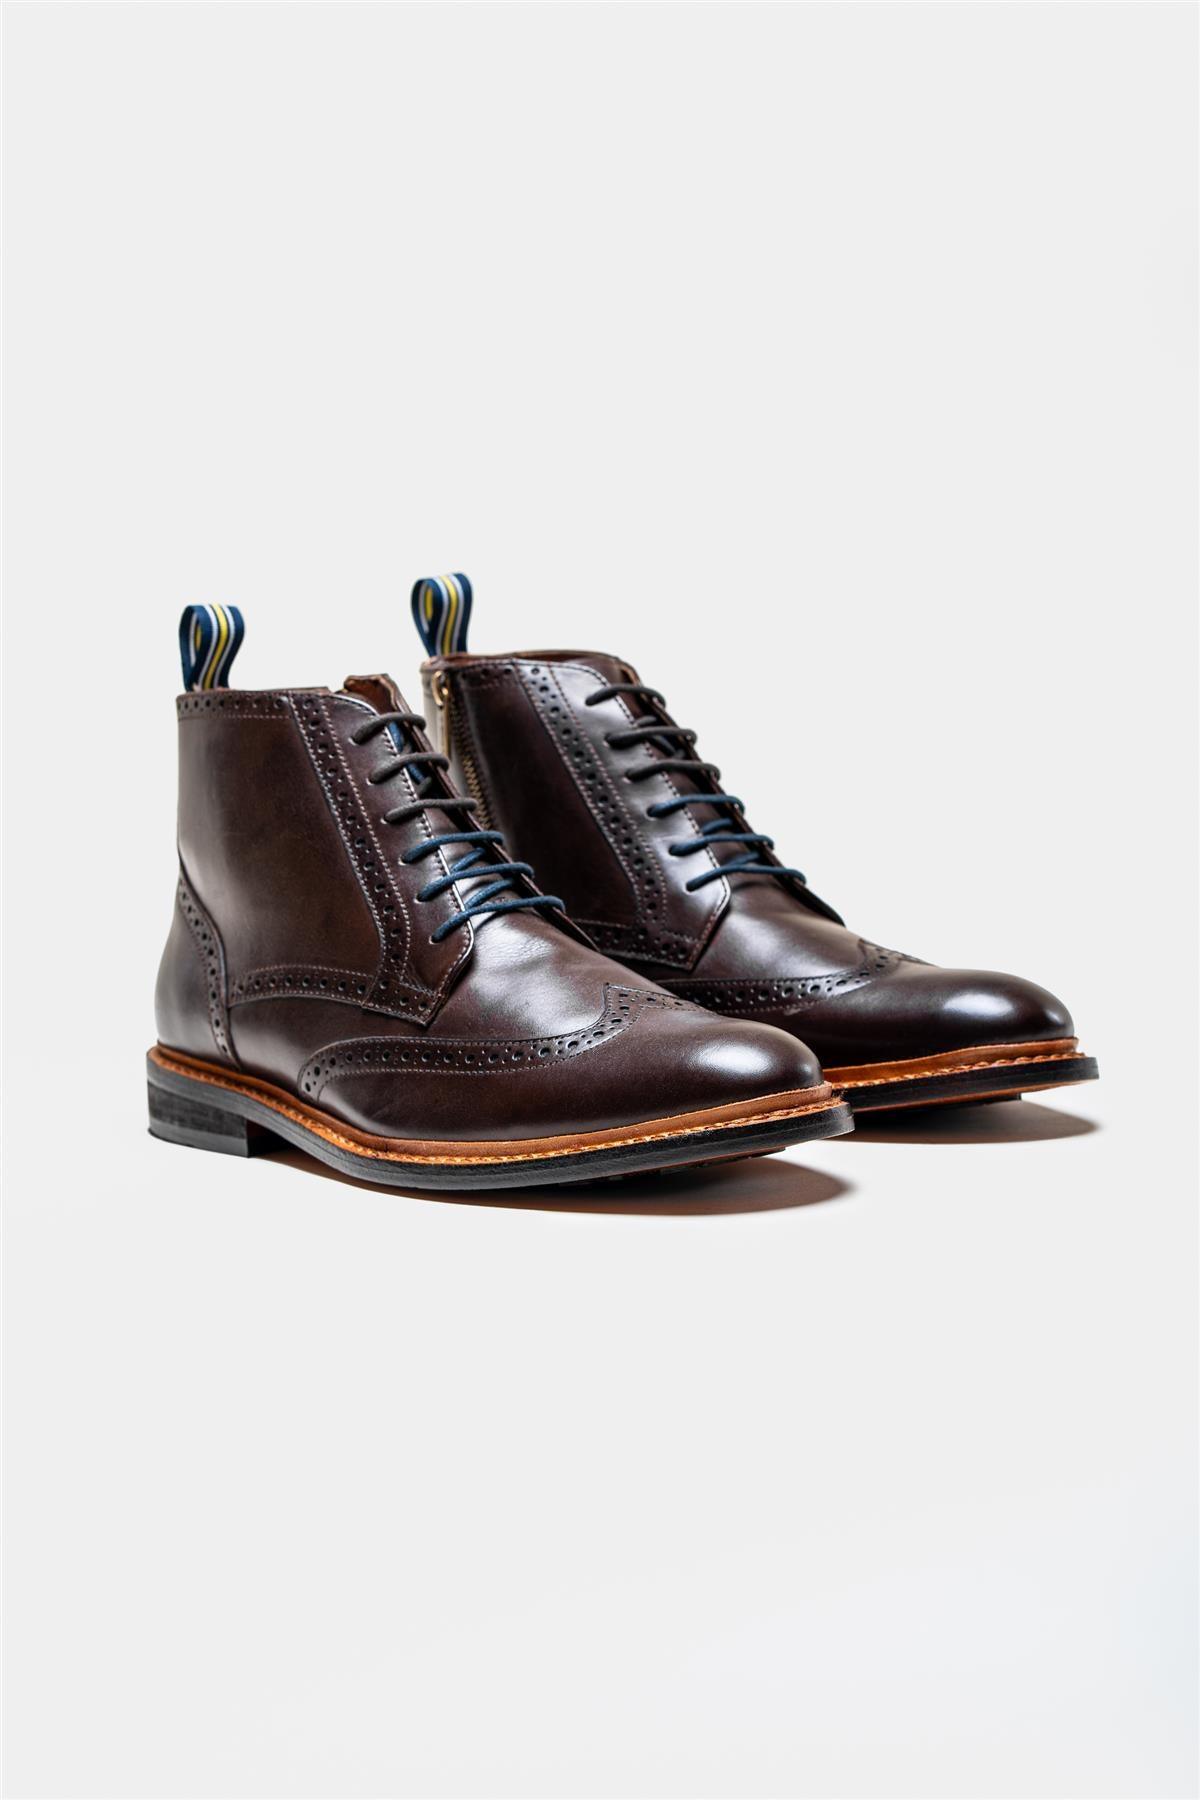 Ashmoor brown boots front